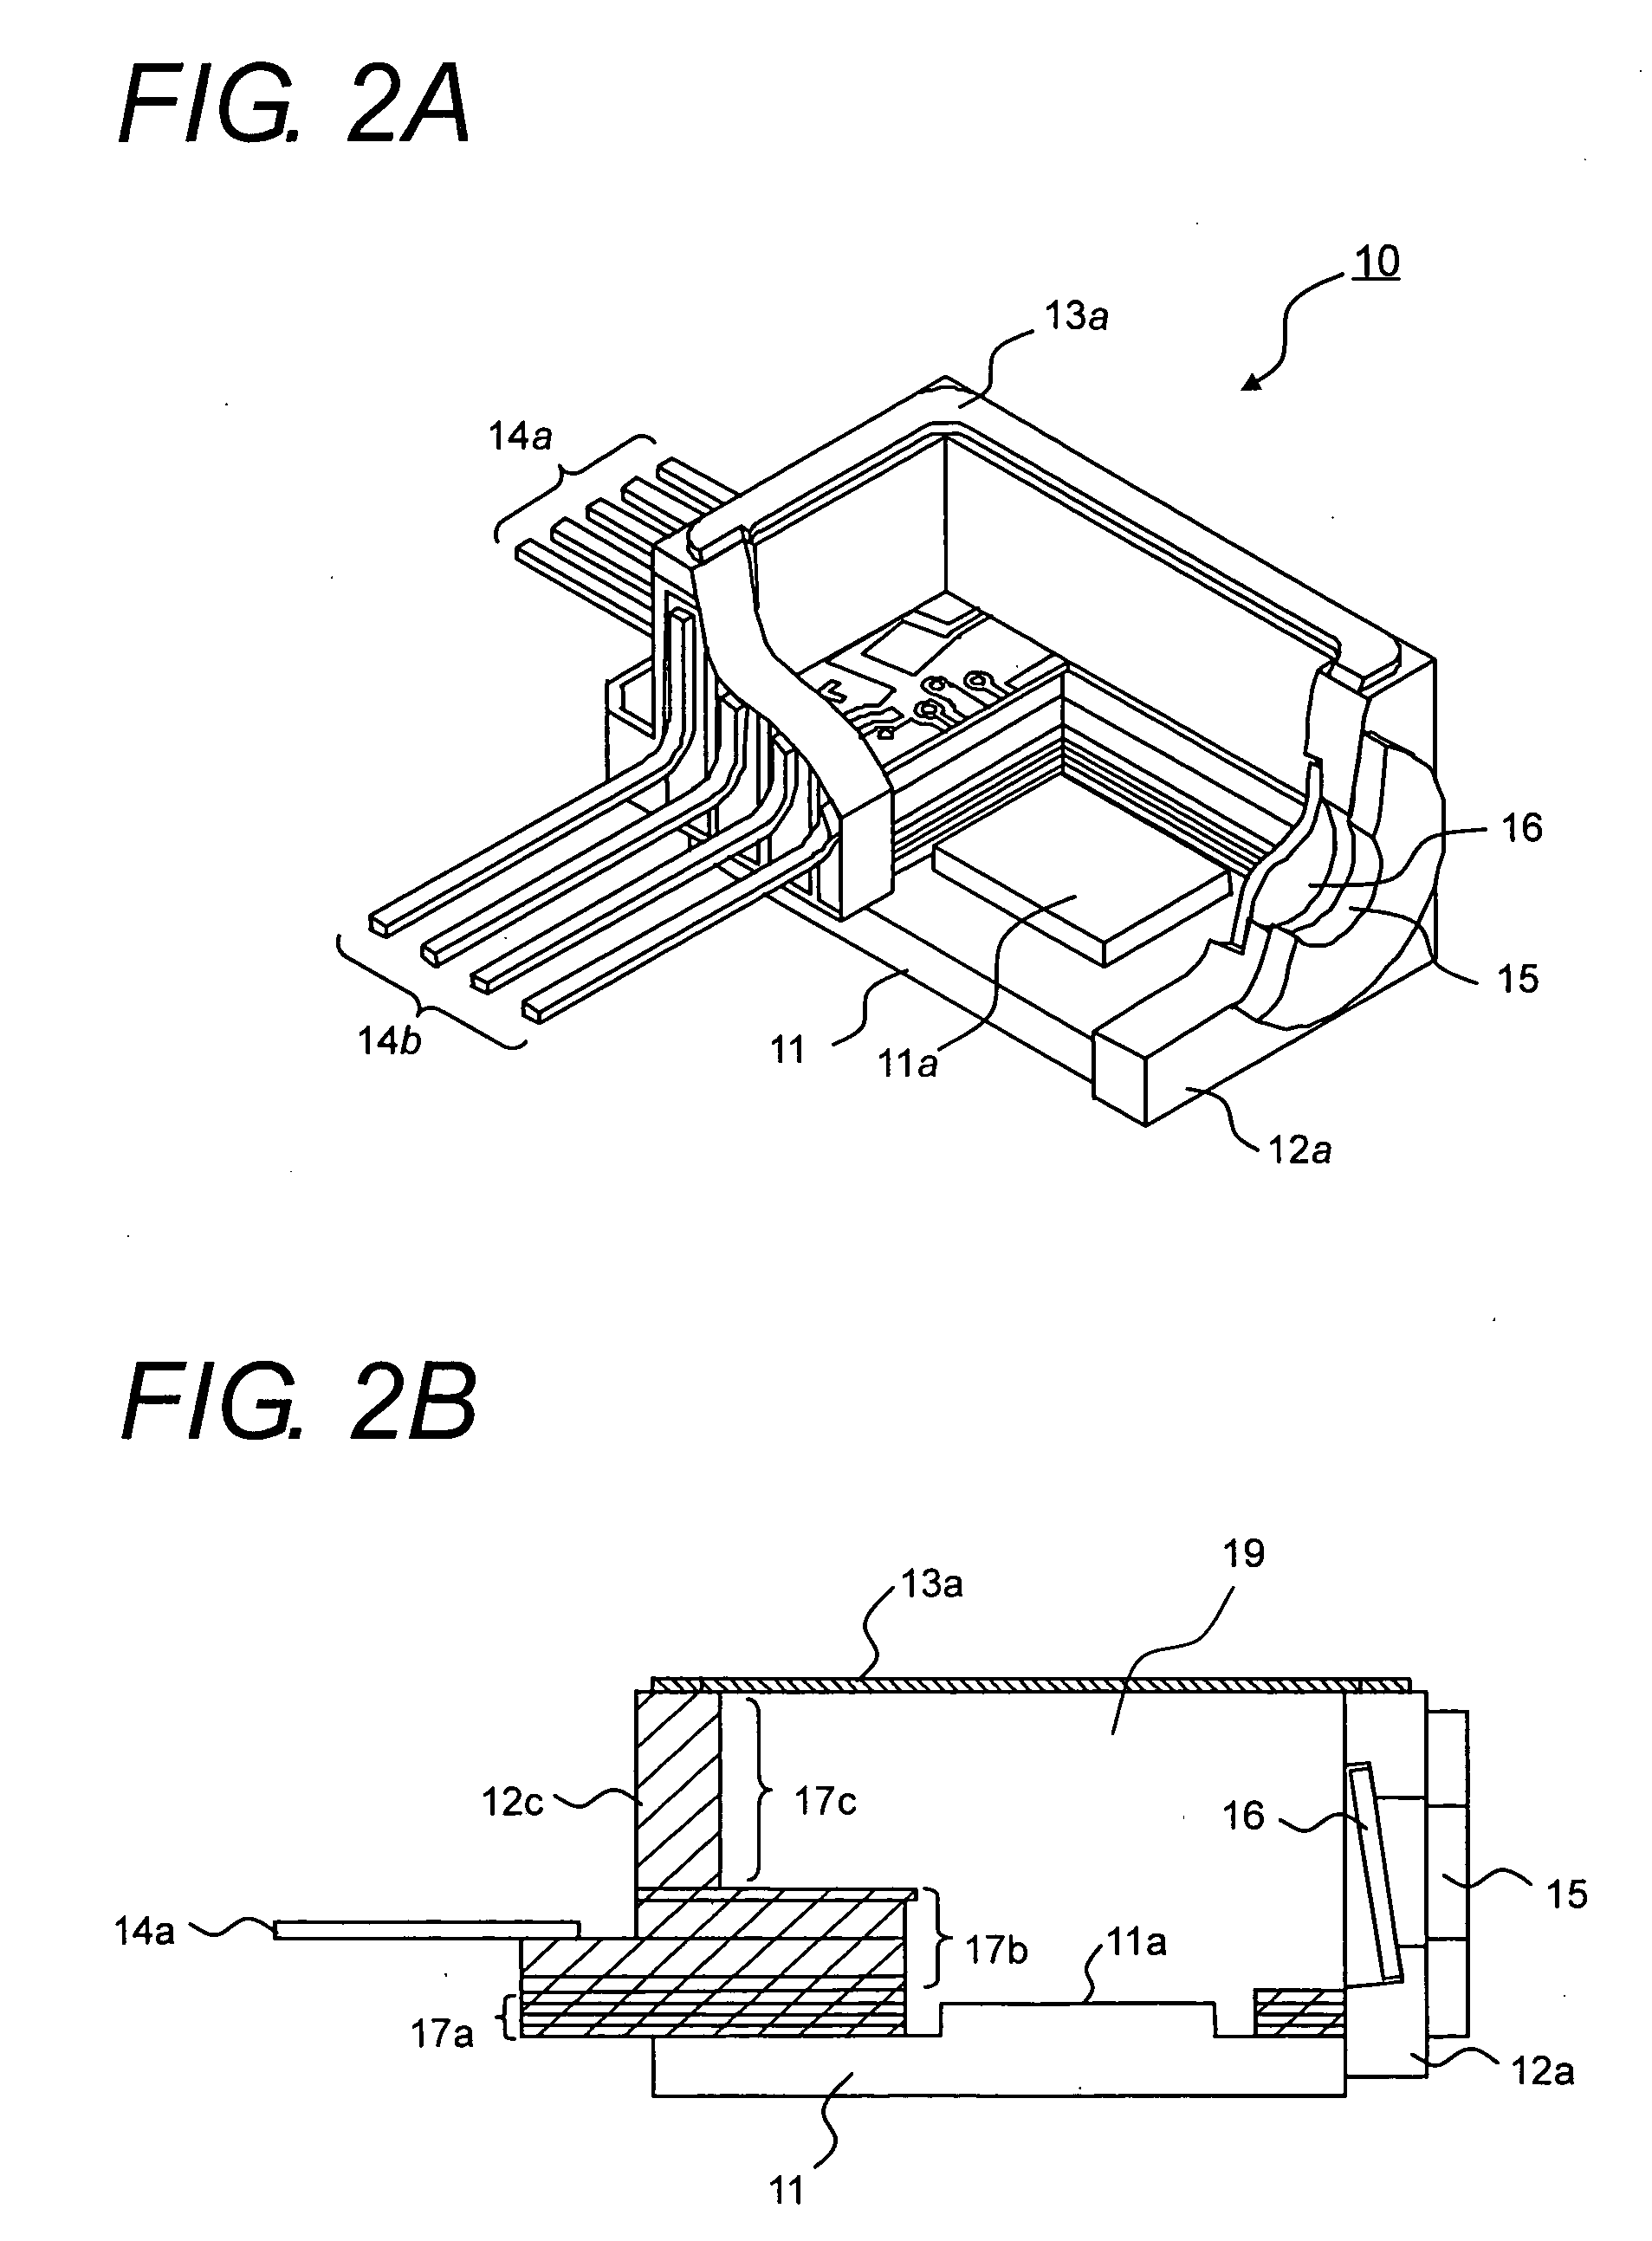 Method for manufacturing a transmitting optical sub-assembly with a thermo-electric cooler therein